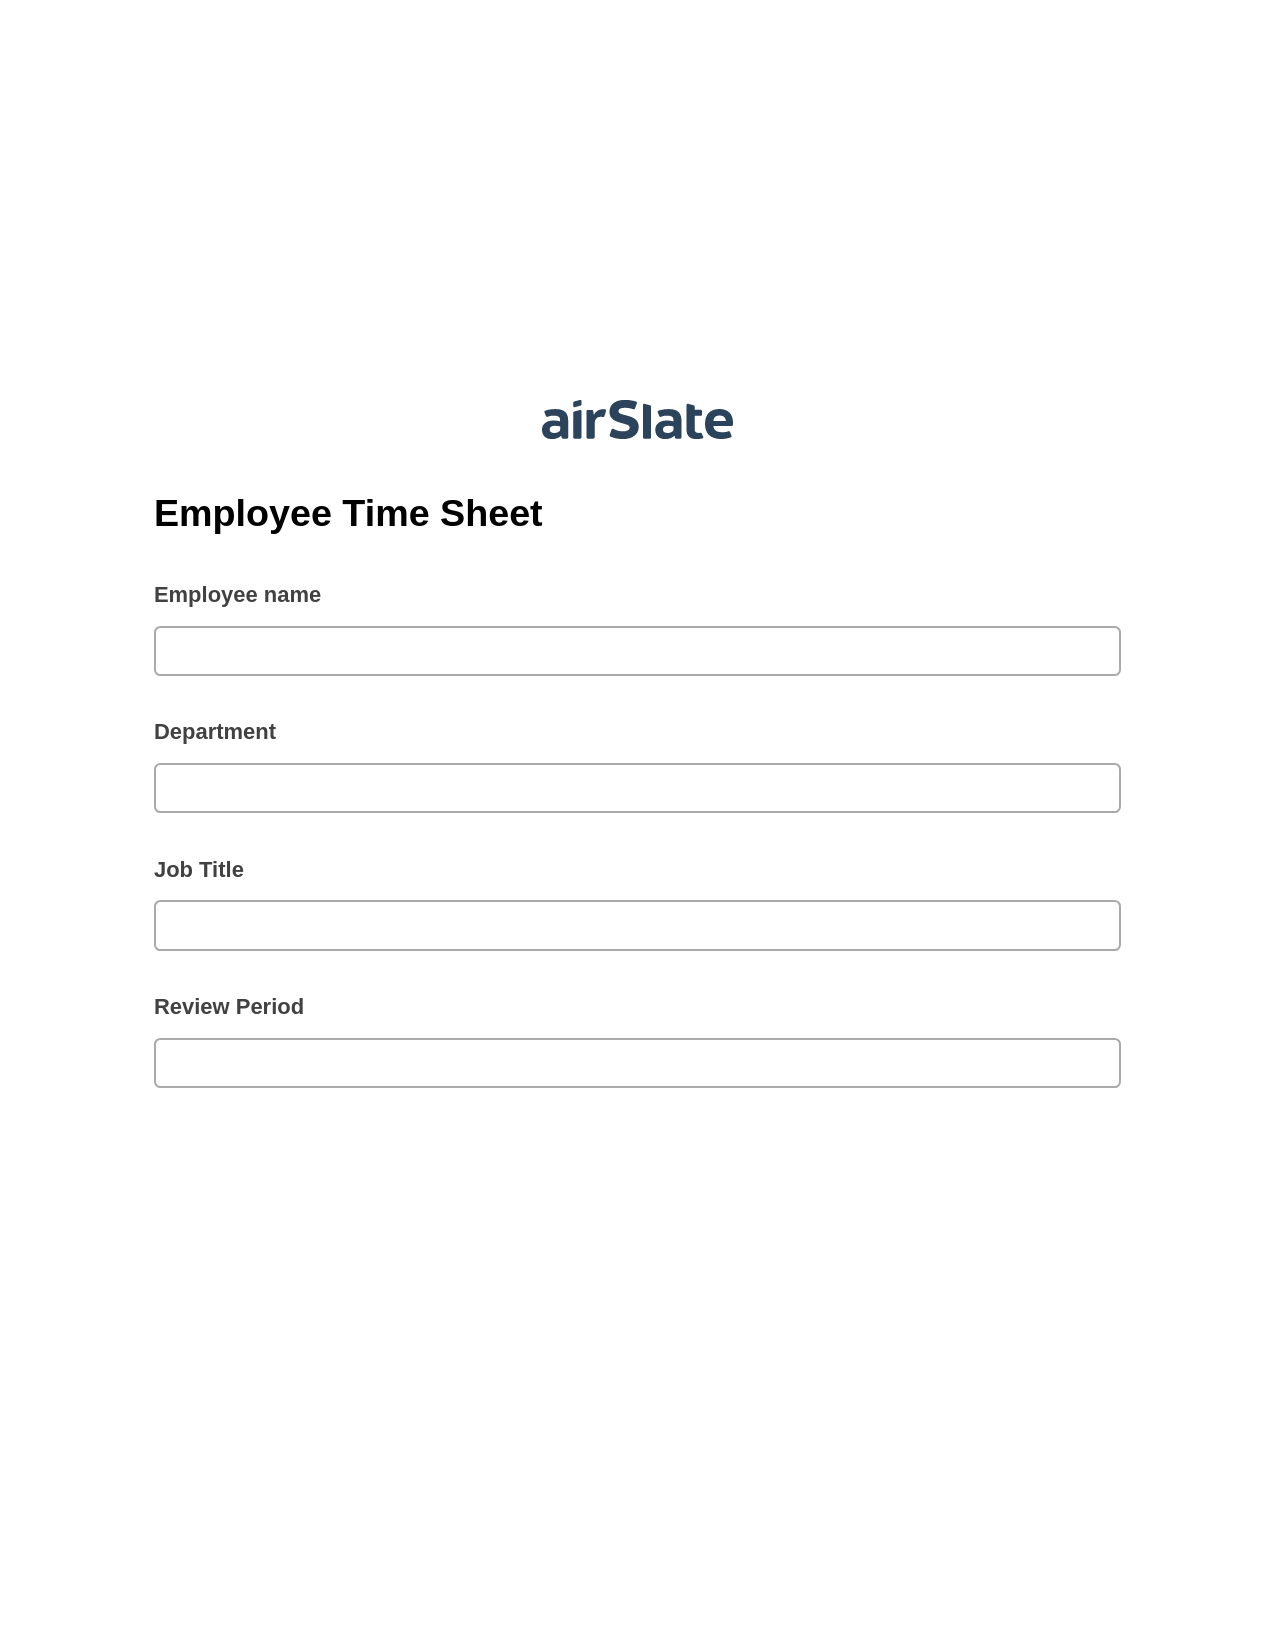 Employee Time Sheet Prefill from NetSuite records, Create Salesforce Records Bot, Export to WebMerge Bot